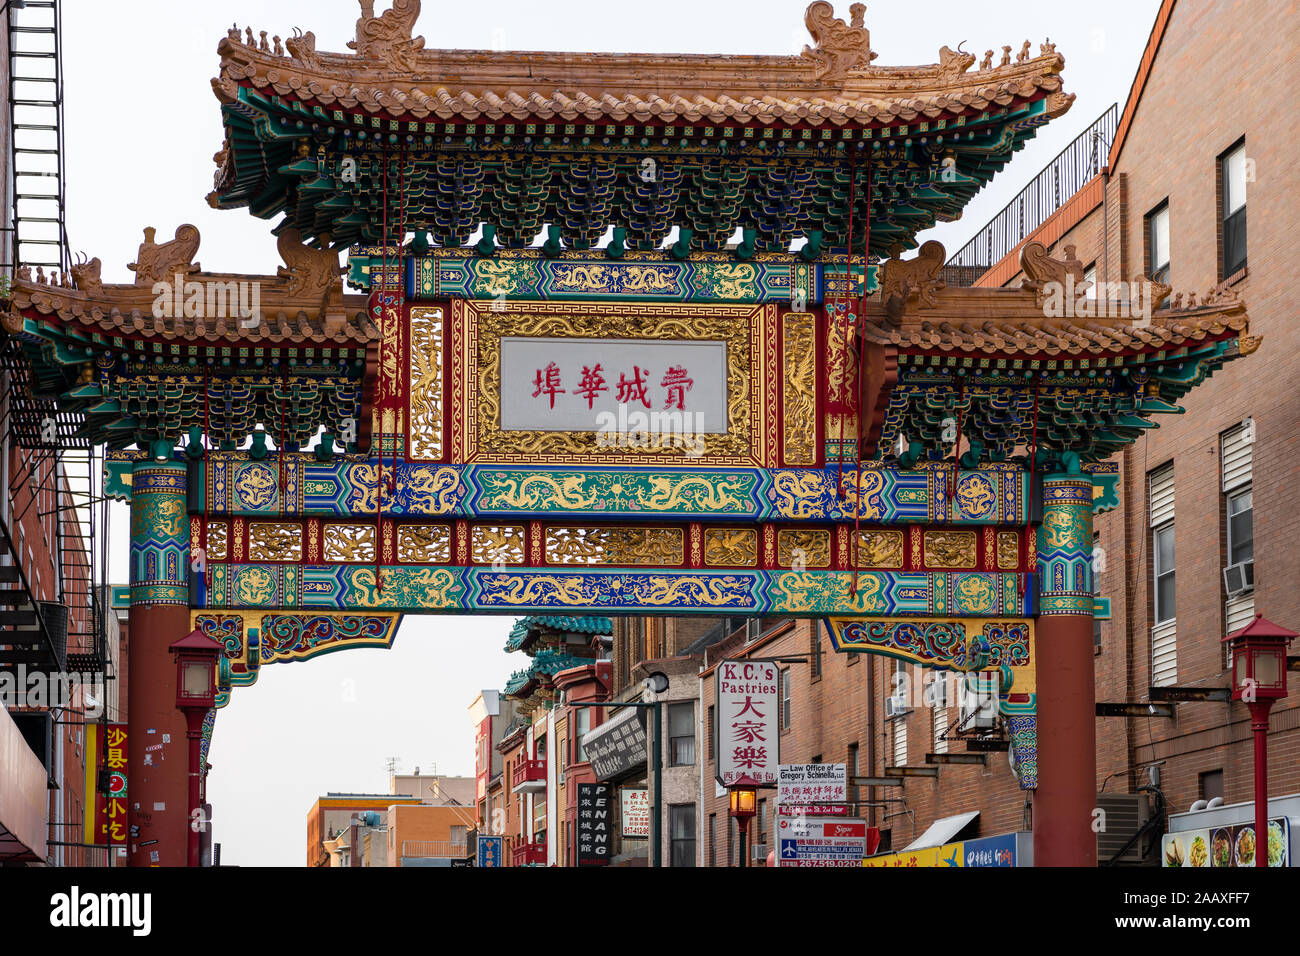 The highly ornate Friendship Arch in Philadelphia's Chinatown on N Tenth St and Arch St. Stock Photo